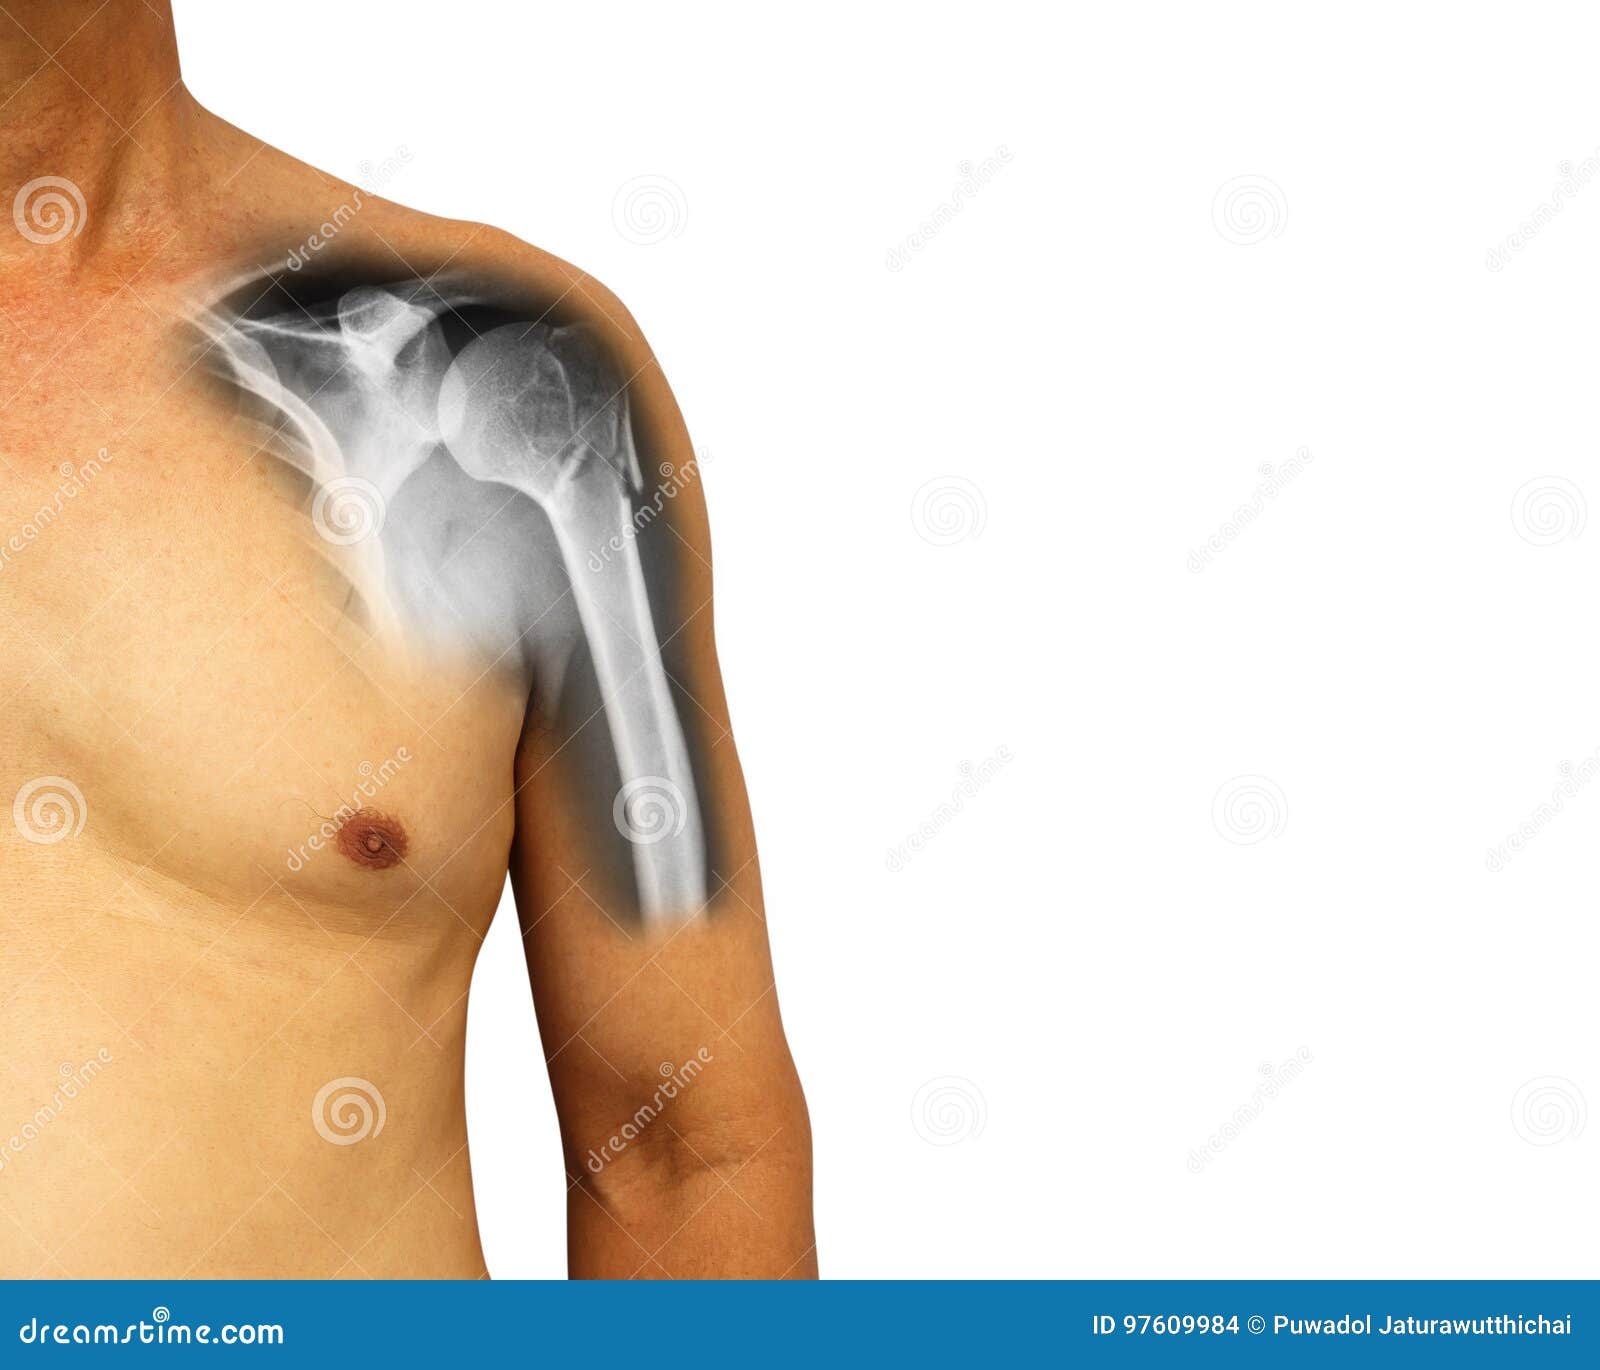 human shoulder with x-ray show fracture at neck of humerus arm bone .  background . blank area at right side